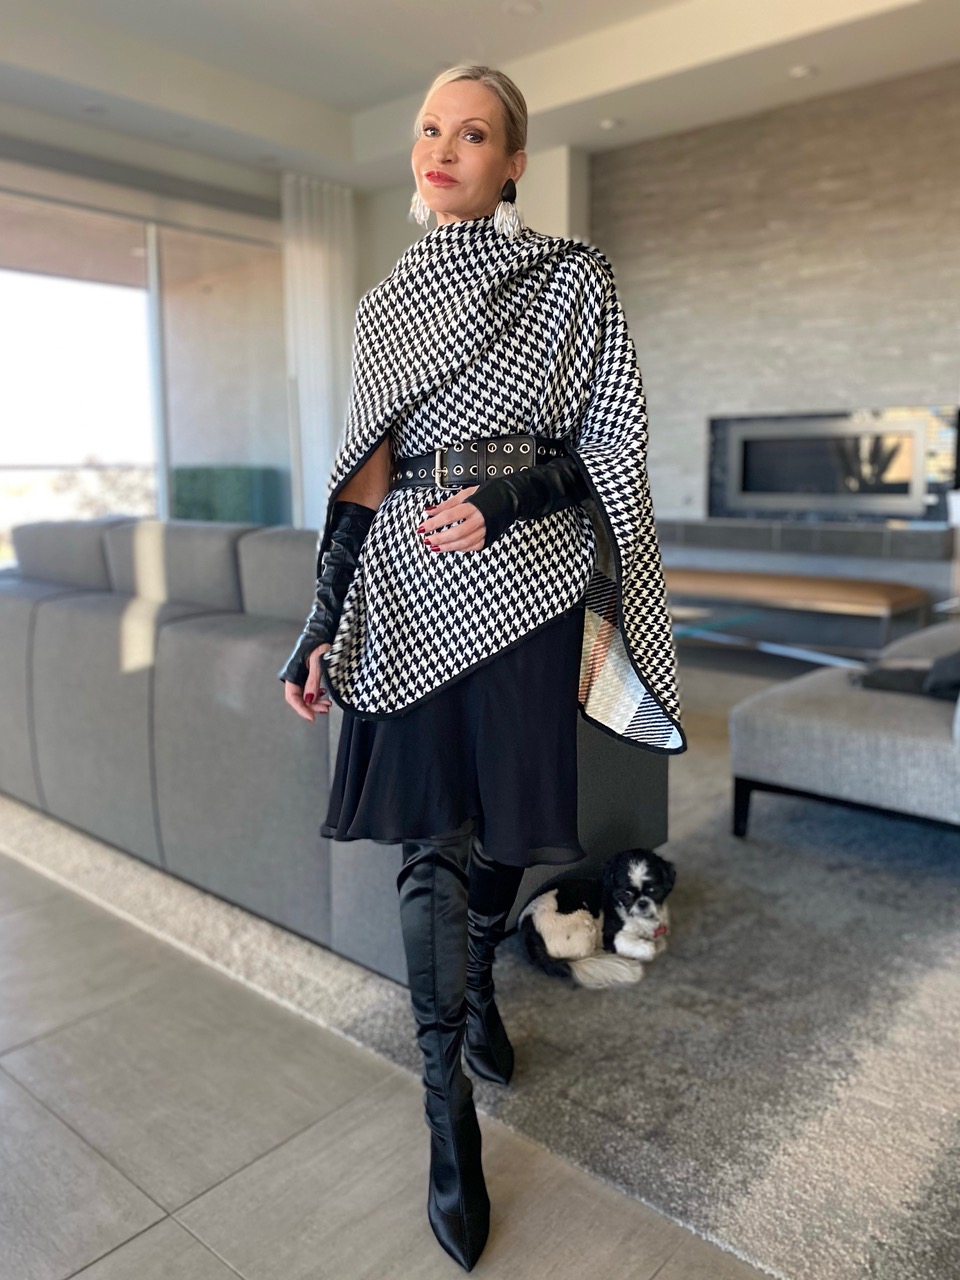 Lifestyle Influencer, jamie Lewinger of More Than Turquoise wearing long fingerless black leather gloves from Amazon